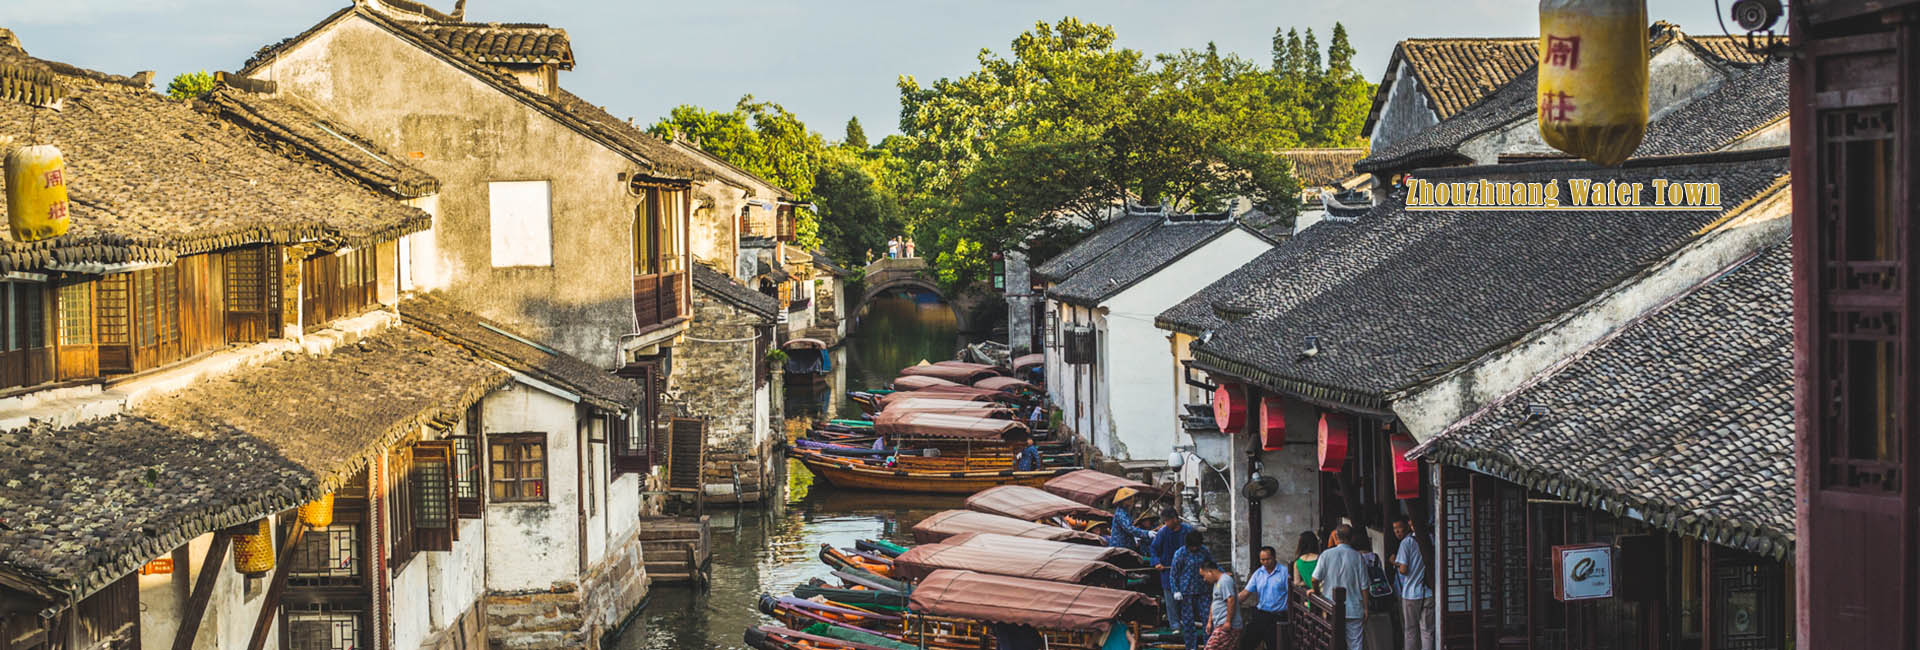 4 Days Shanghai In-depth Tour with Day Trip to Suzhou